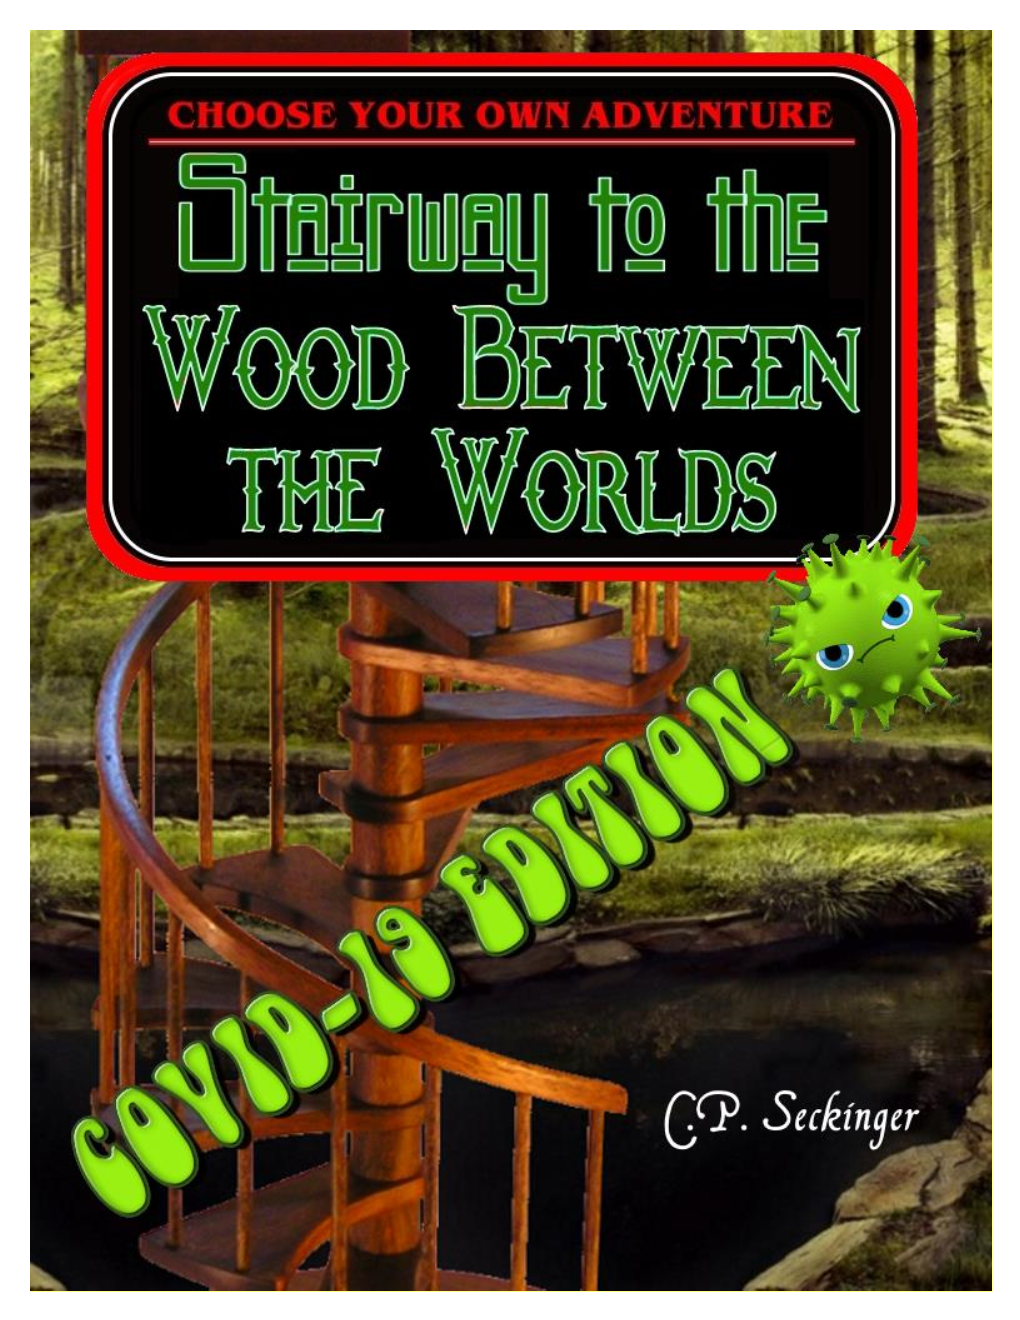 Stairway to the Wood Between the Worlds